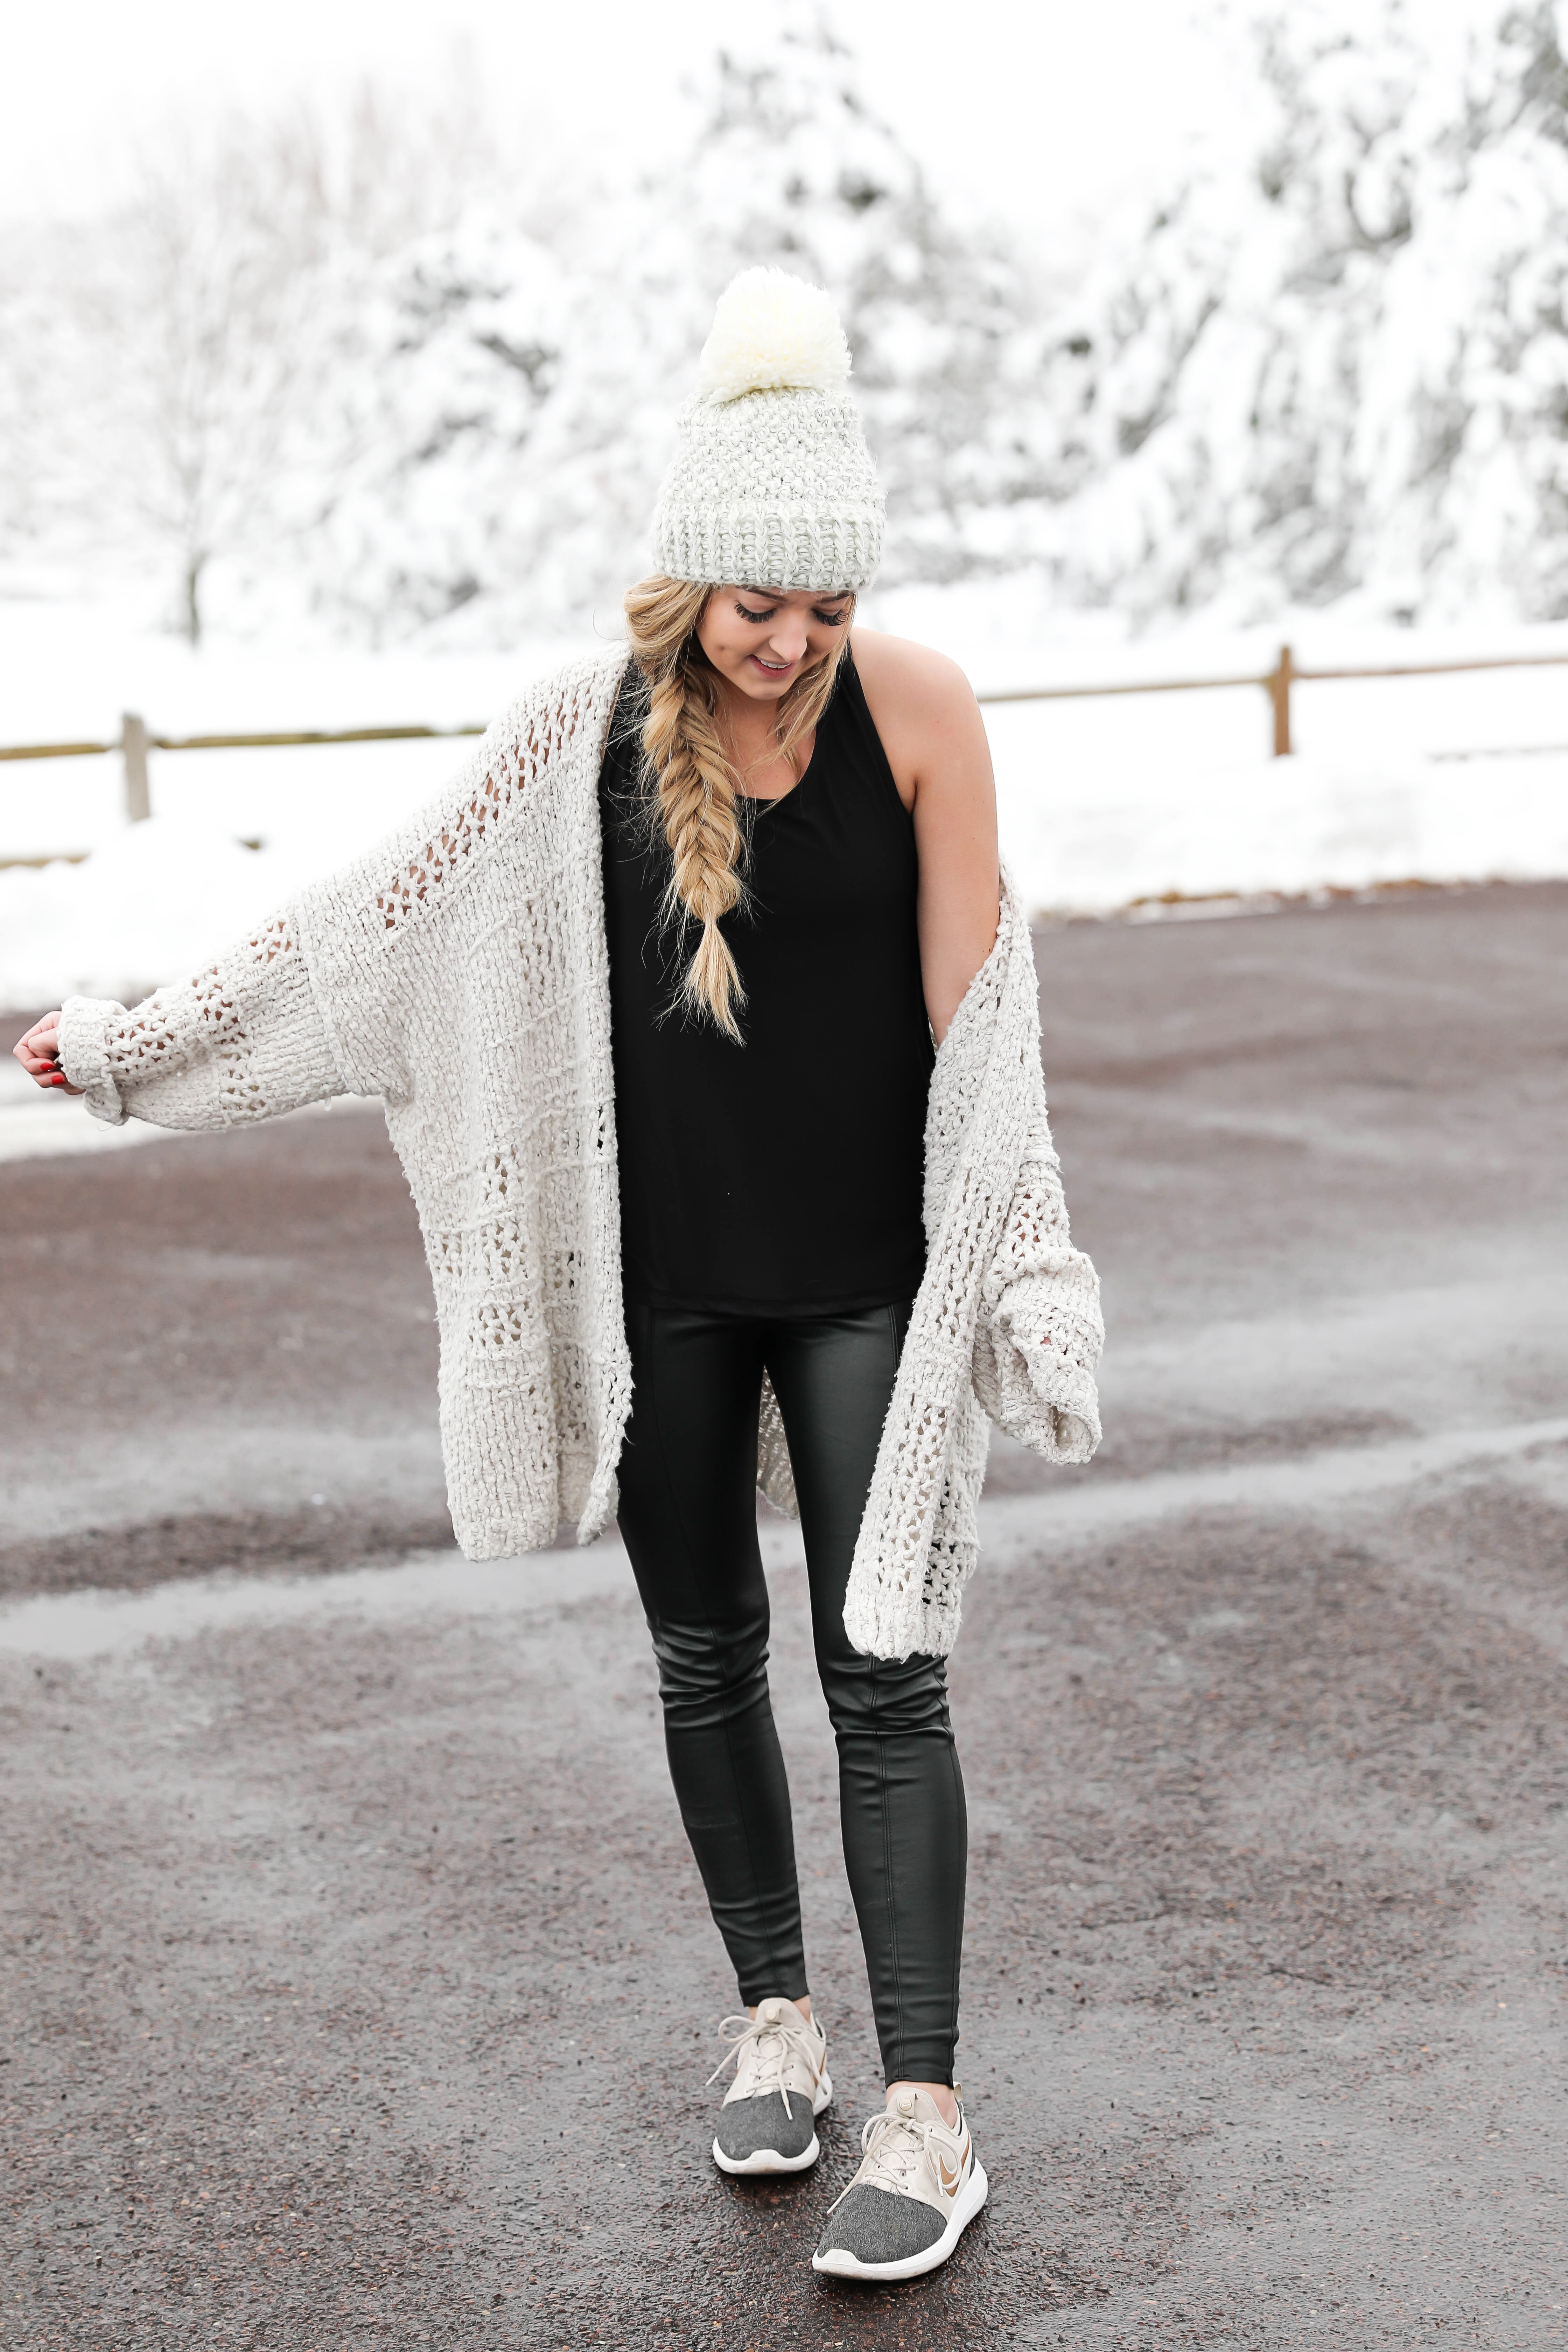 The best faux leather leggings! Comparing three different brands of faux leather pants including spanx, topshop, and target! Cute ideas for causal winter outfits and how to style leather pants! Details on fashion blog daily dose of charm by lauren lindmark